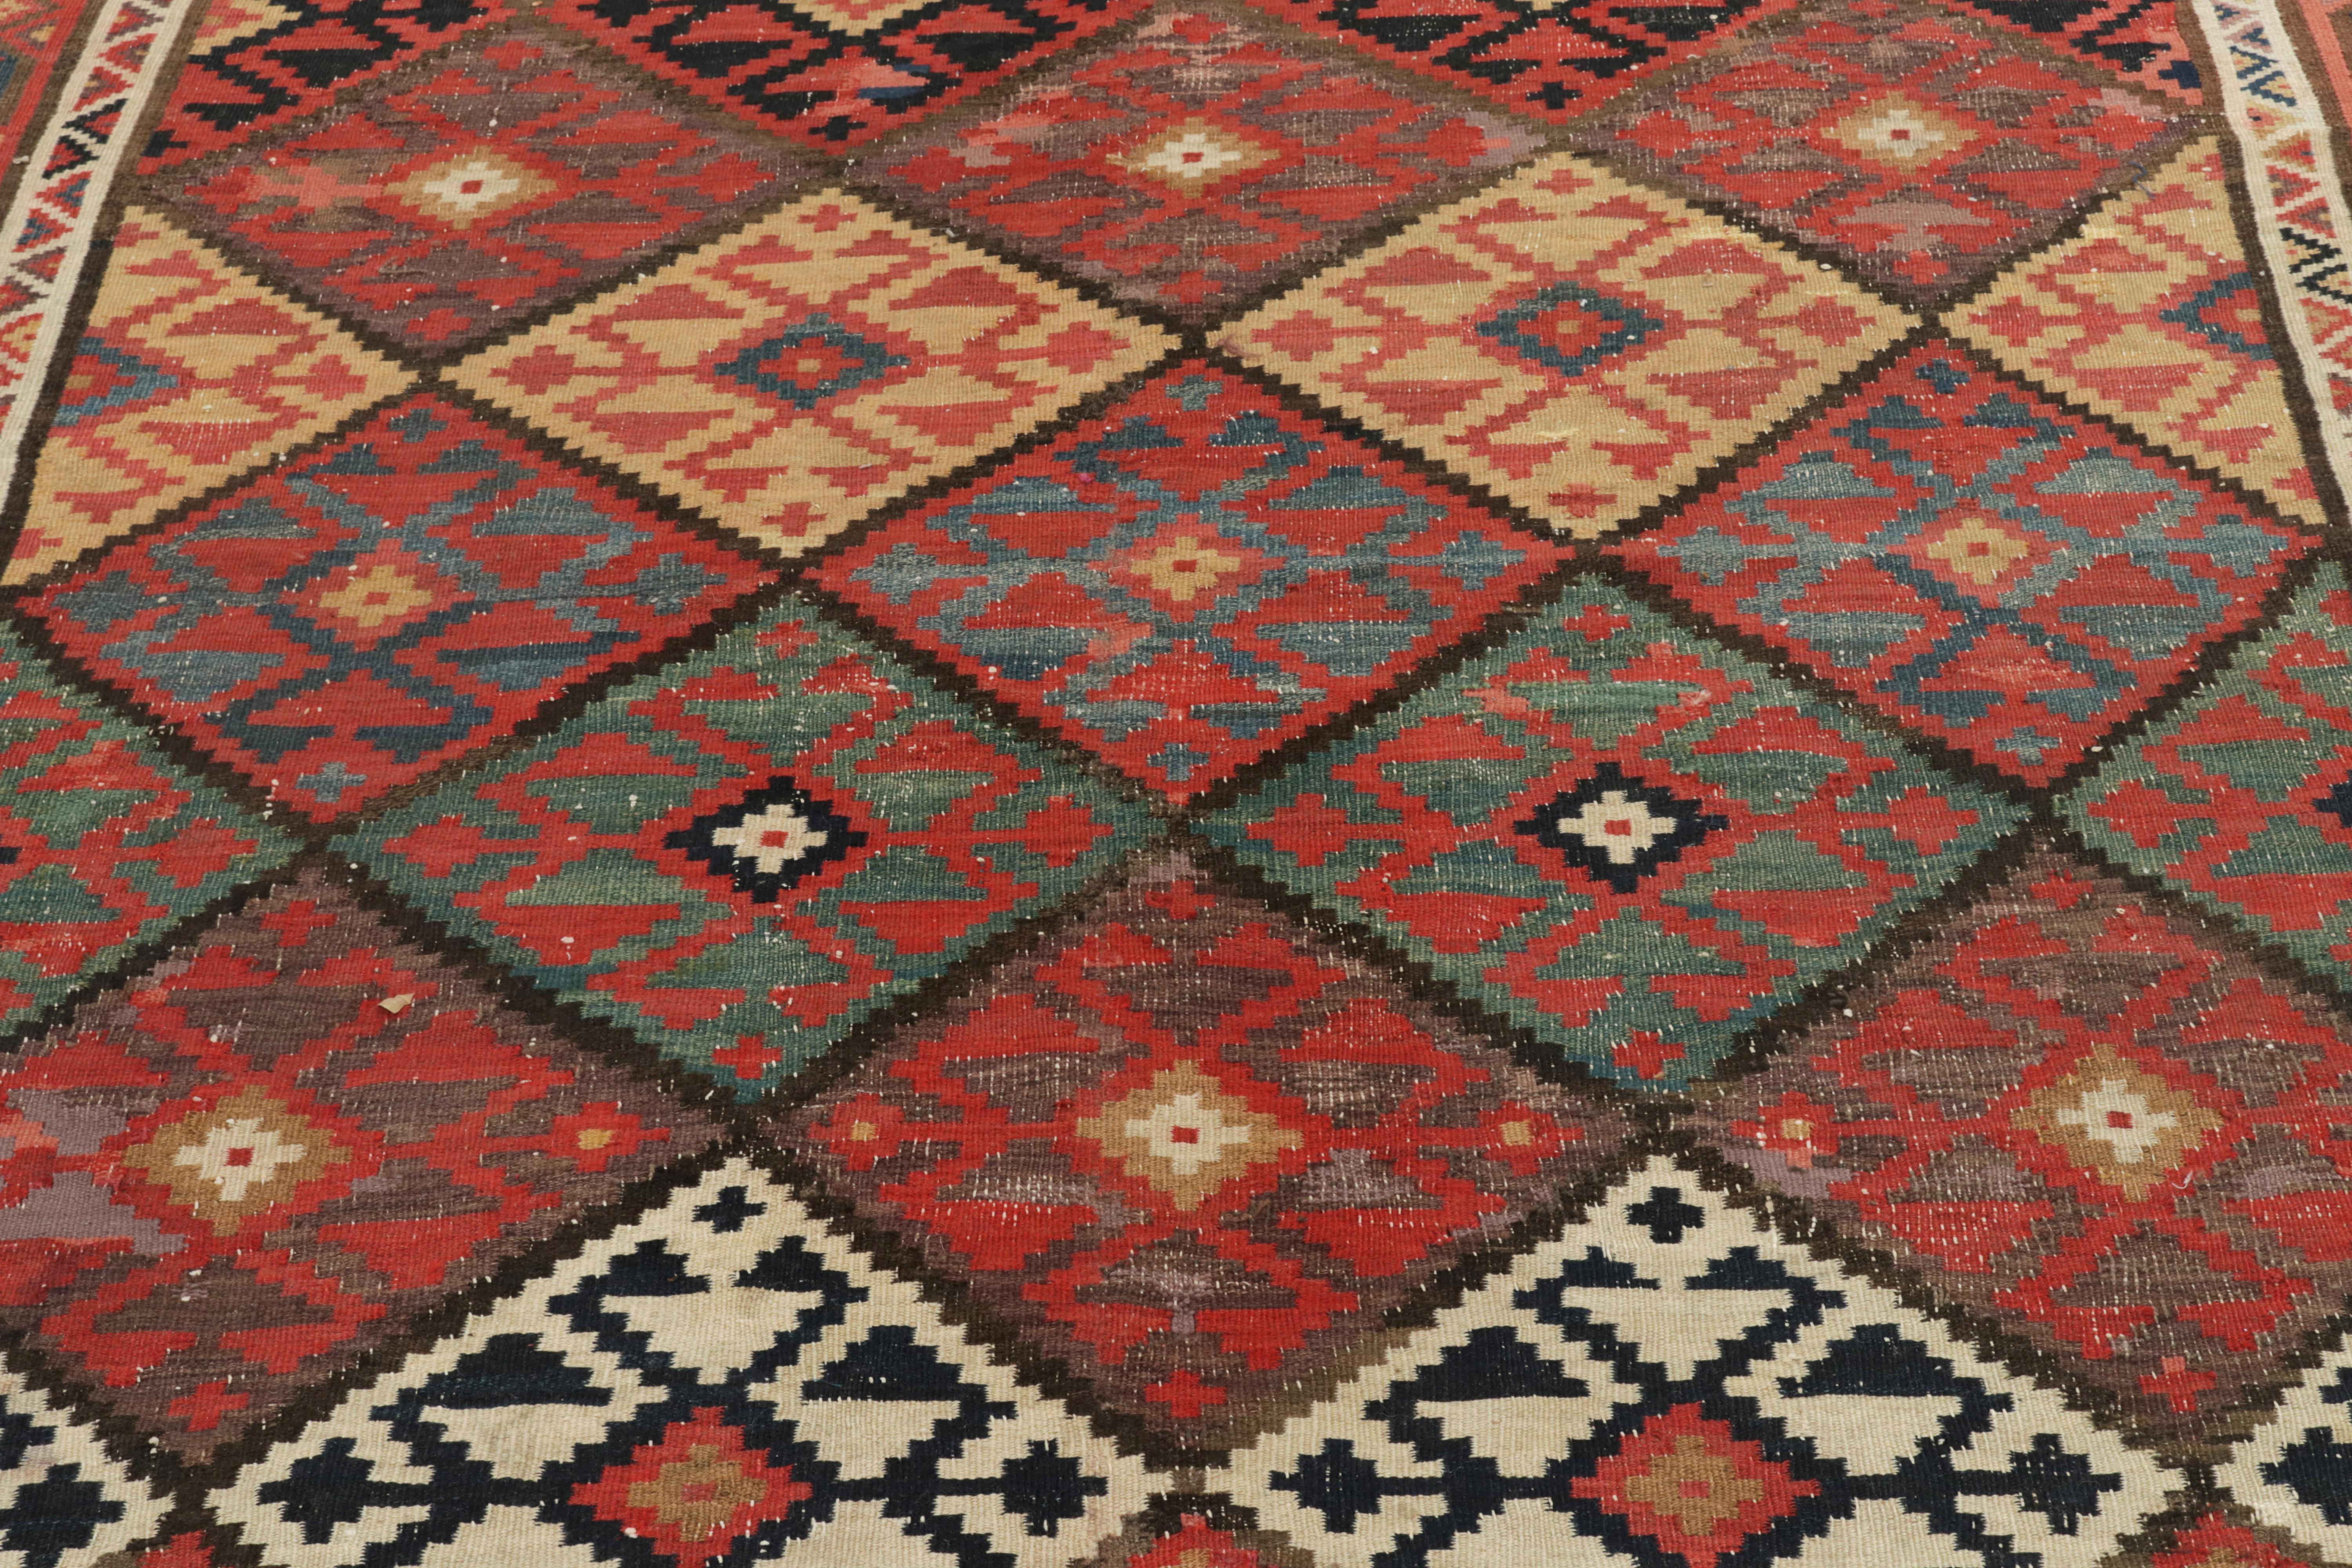 Hand-Knotted Handwoven Vintage Persian Kilim Rug in Red, Beige-Brown Geometric Pattern